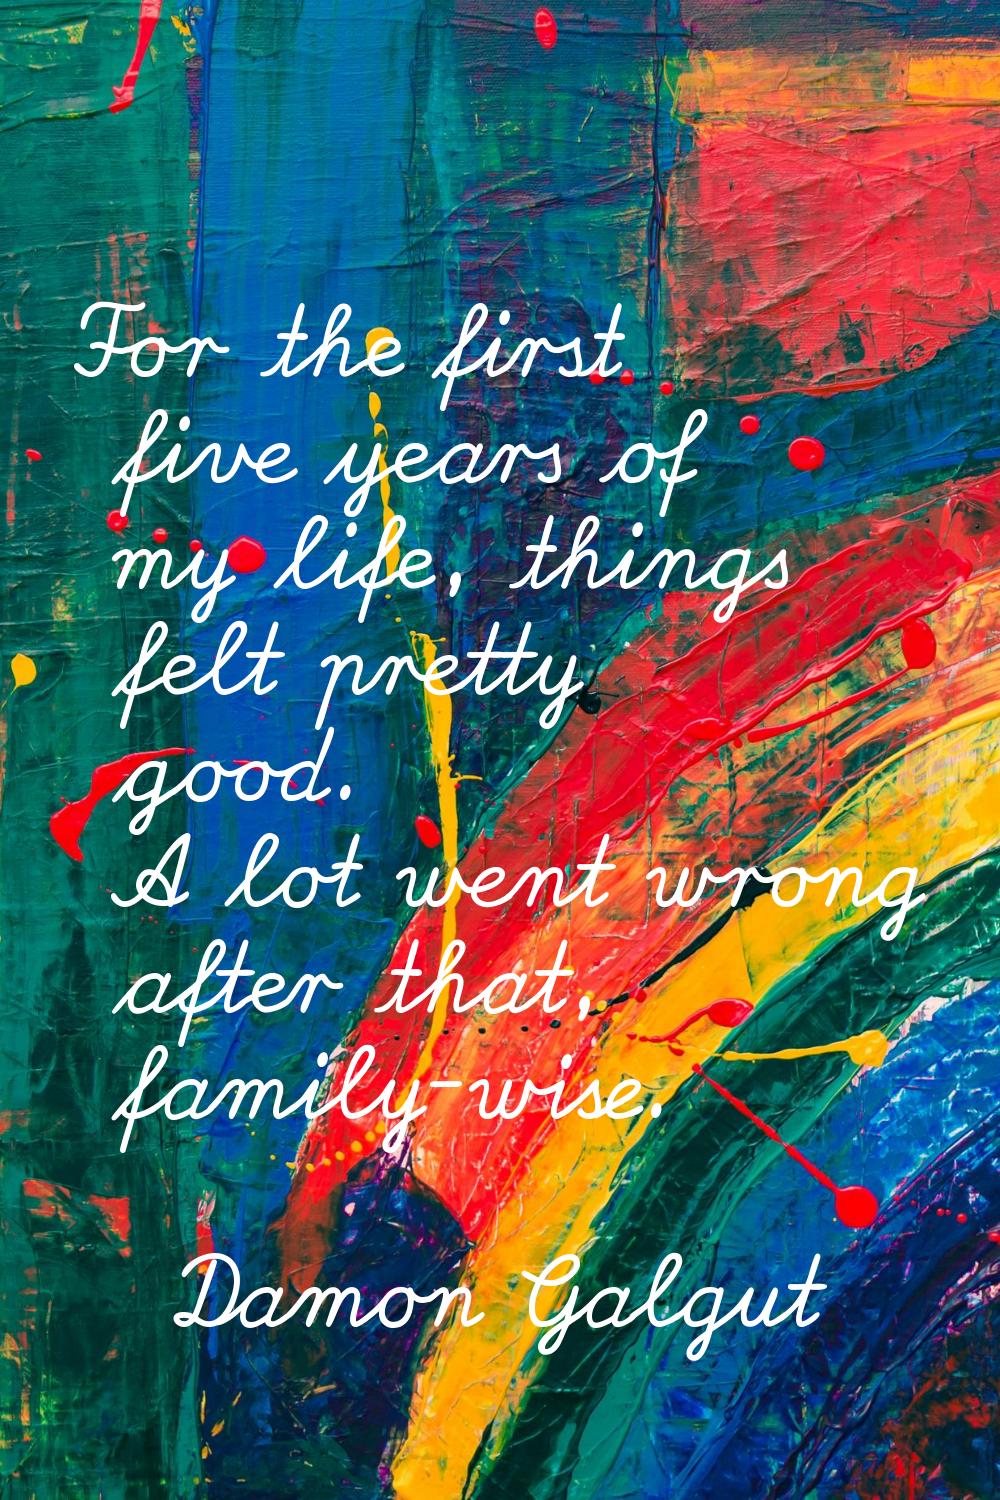 For the first five years of my life, things felt pretty good. A lot went wrong after that, family-w